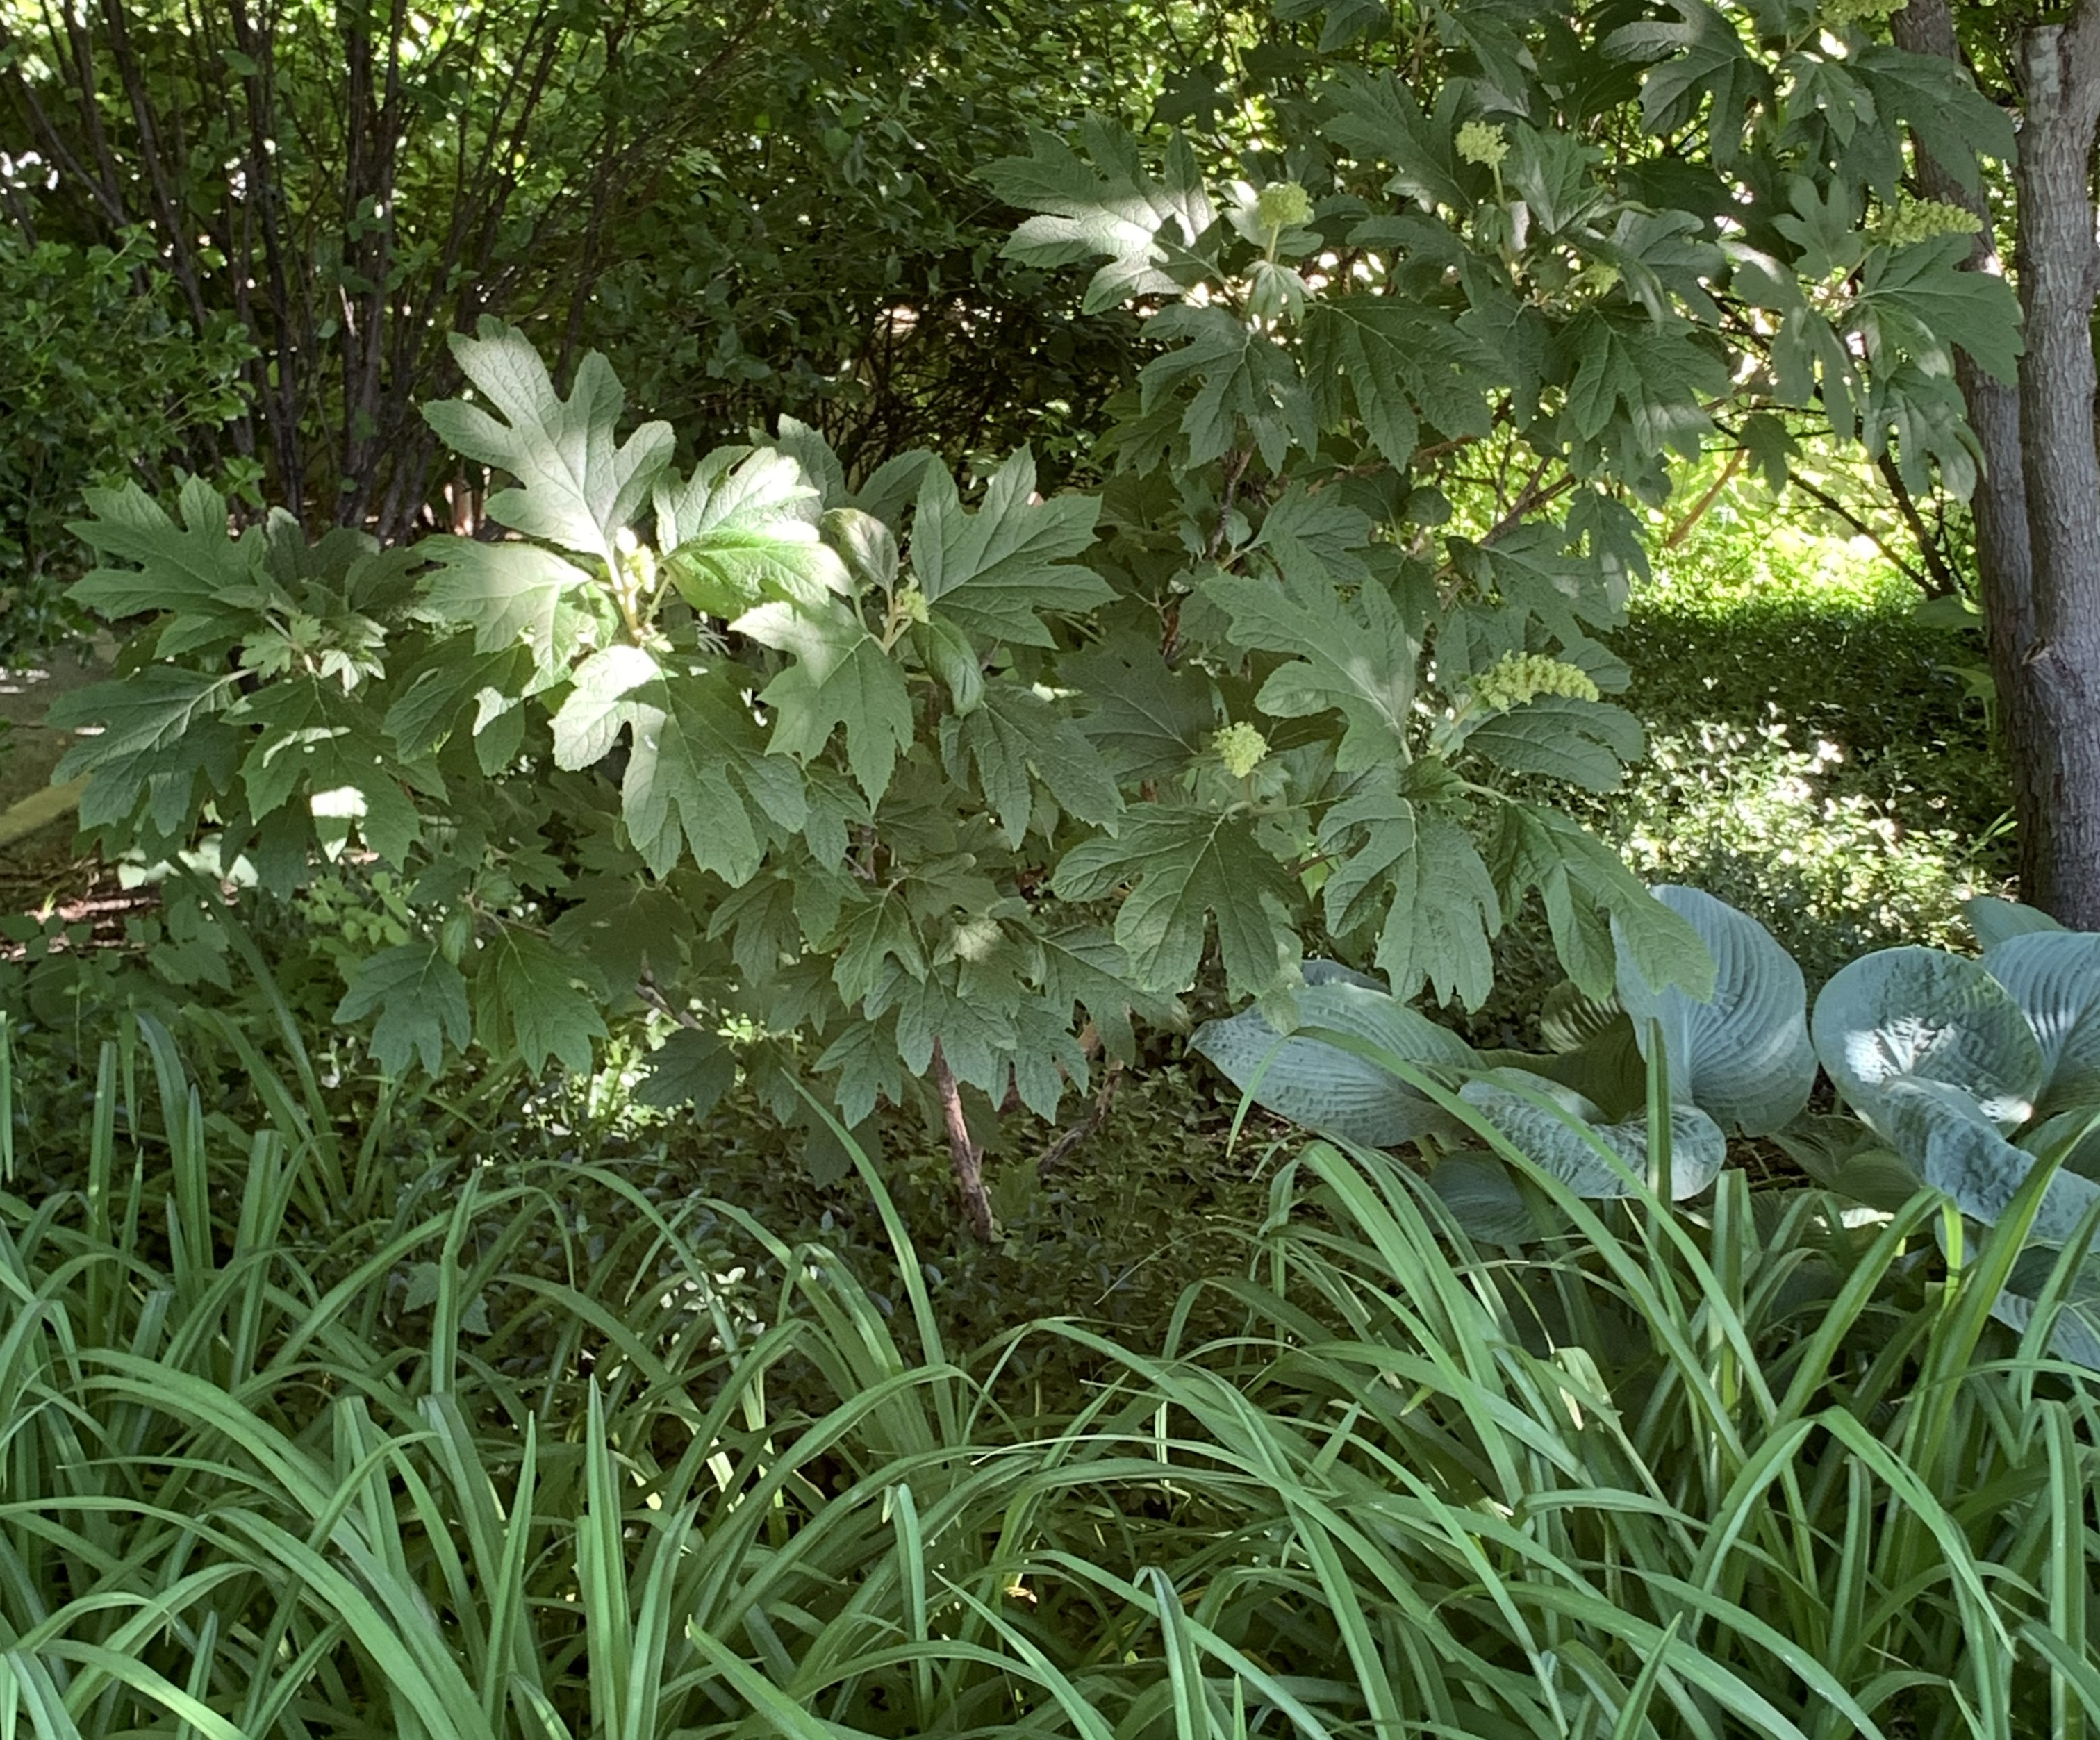 A large bushy plant with green lobed oak-like leaves and a mostly unopened flower at its tip